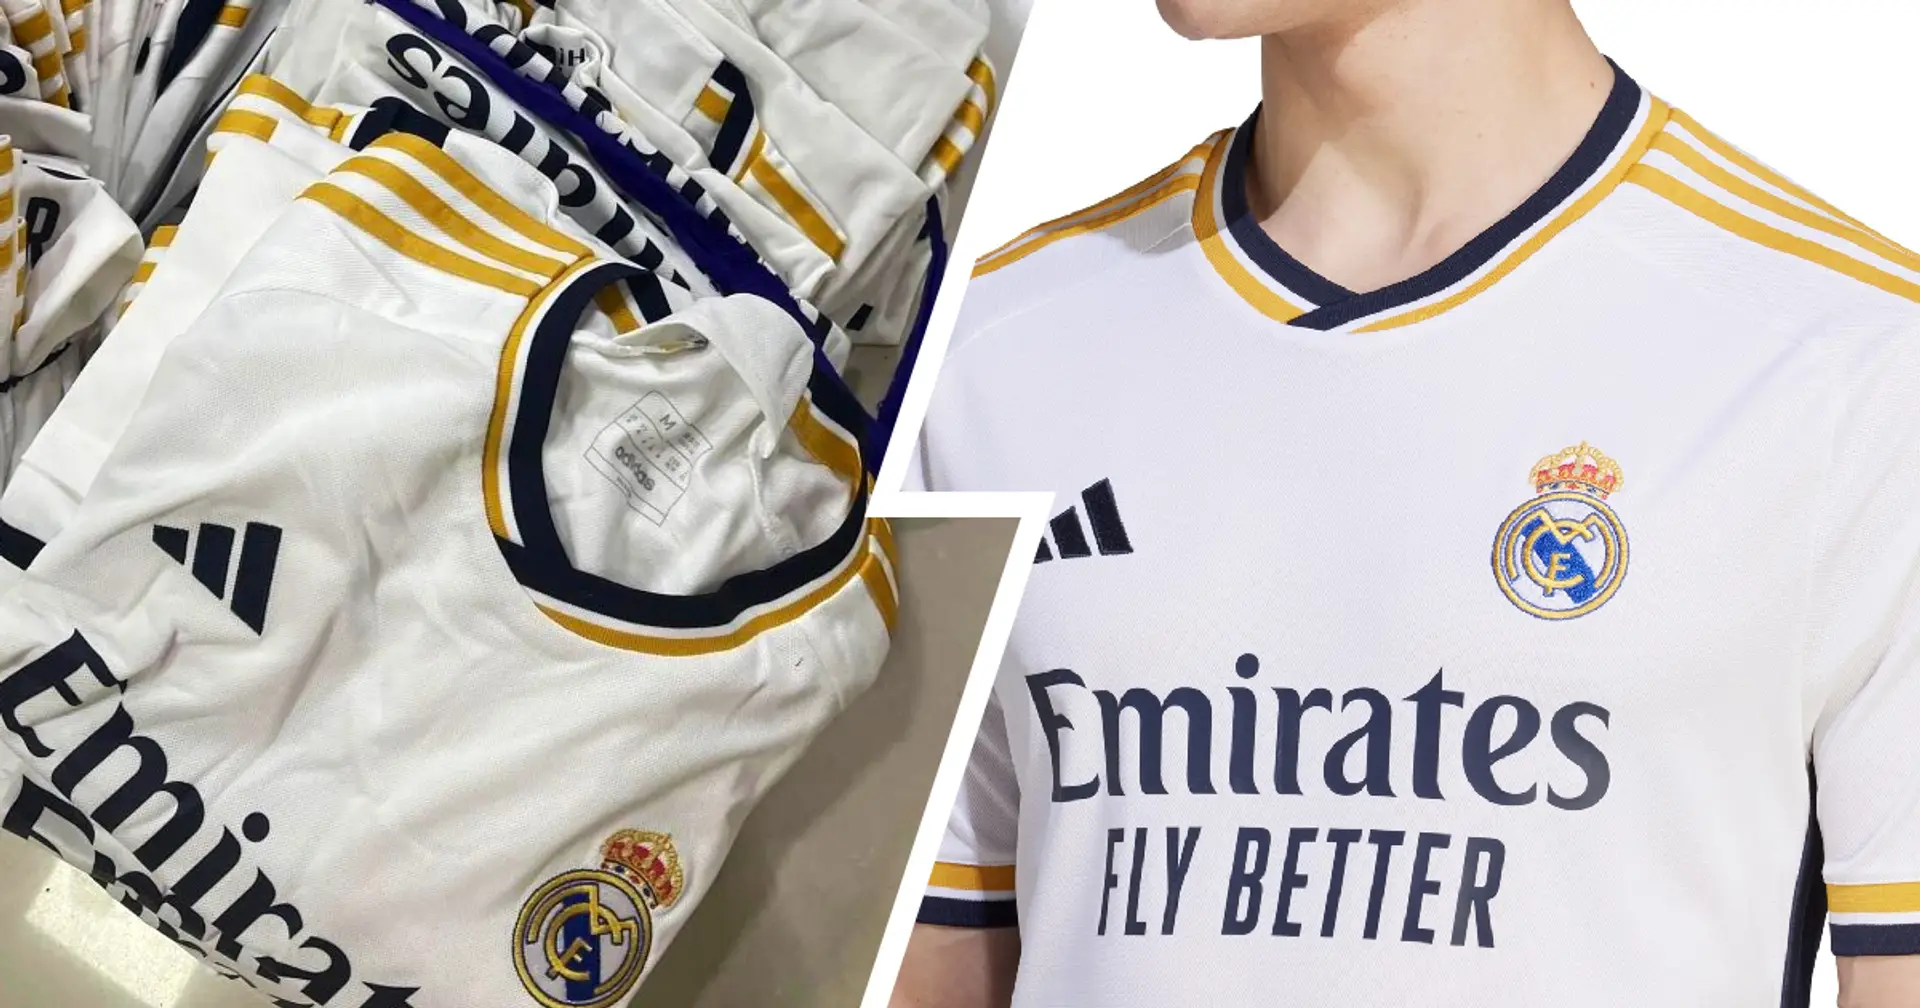 OFFICIAL: Real Madrid unveil home kit for next season — features special message behind